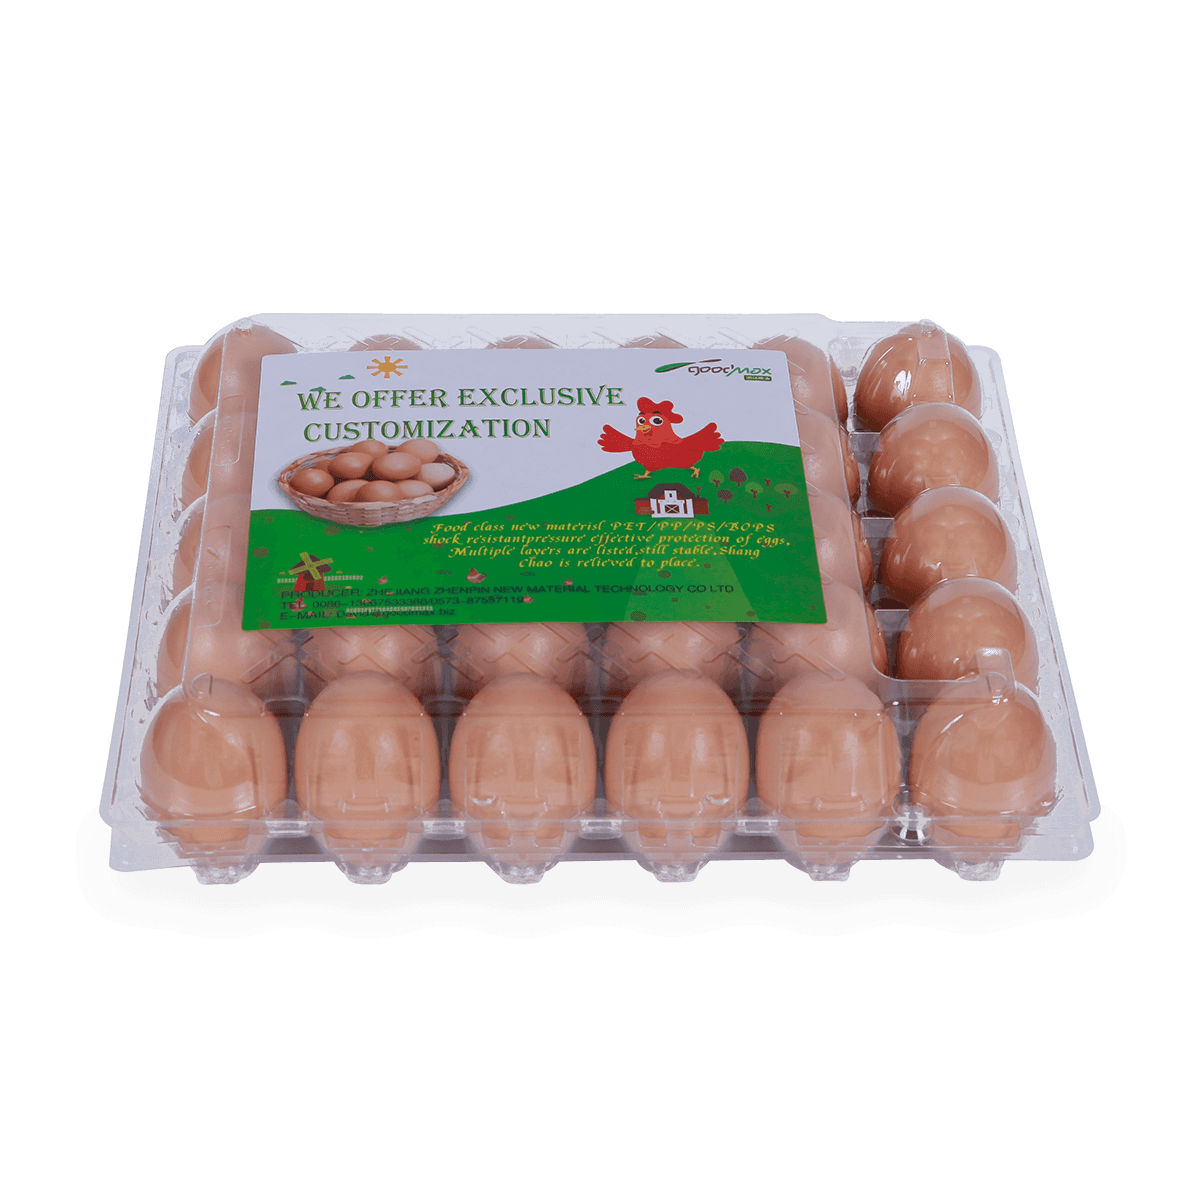 100% recyclabe 6 12 18 20 24 25 cells labeled  plastic Egg Cartons